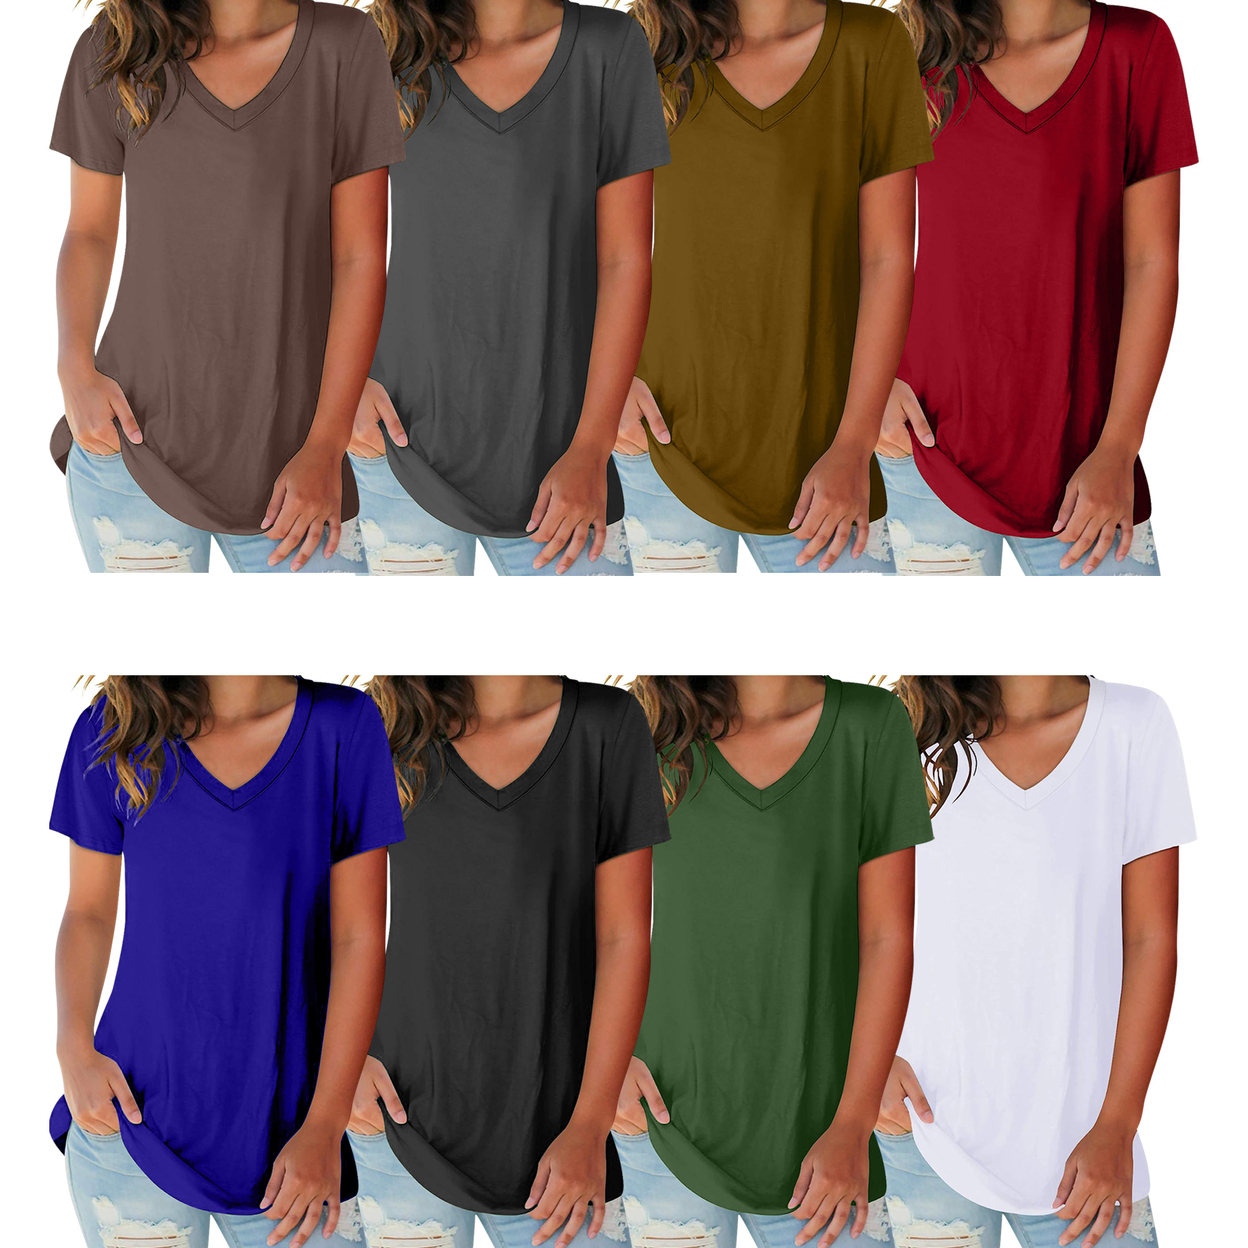 2-Pack: Women's Ultra Soft Smooth Cotton Blend Basic V-Neck Short Sleeve Shirts - Navy & Brown, Small